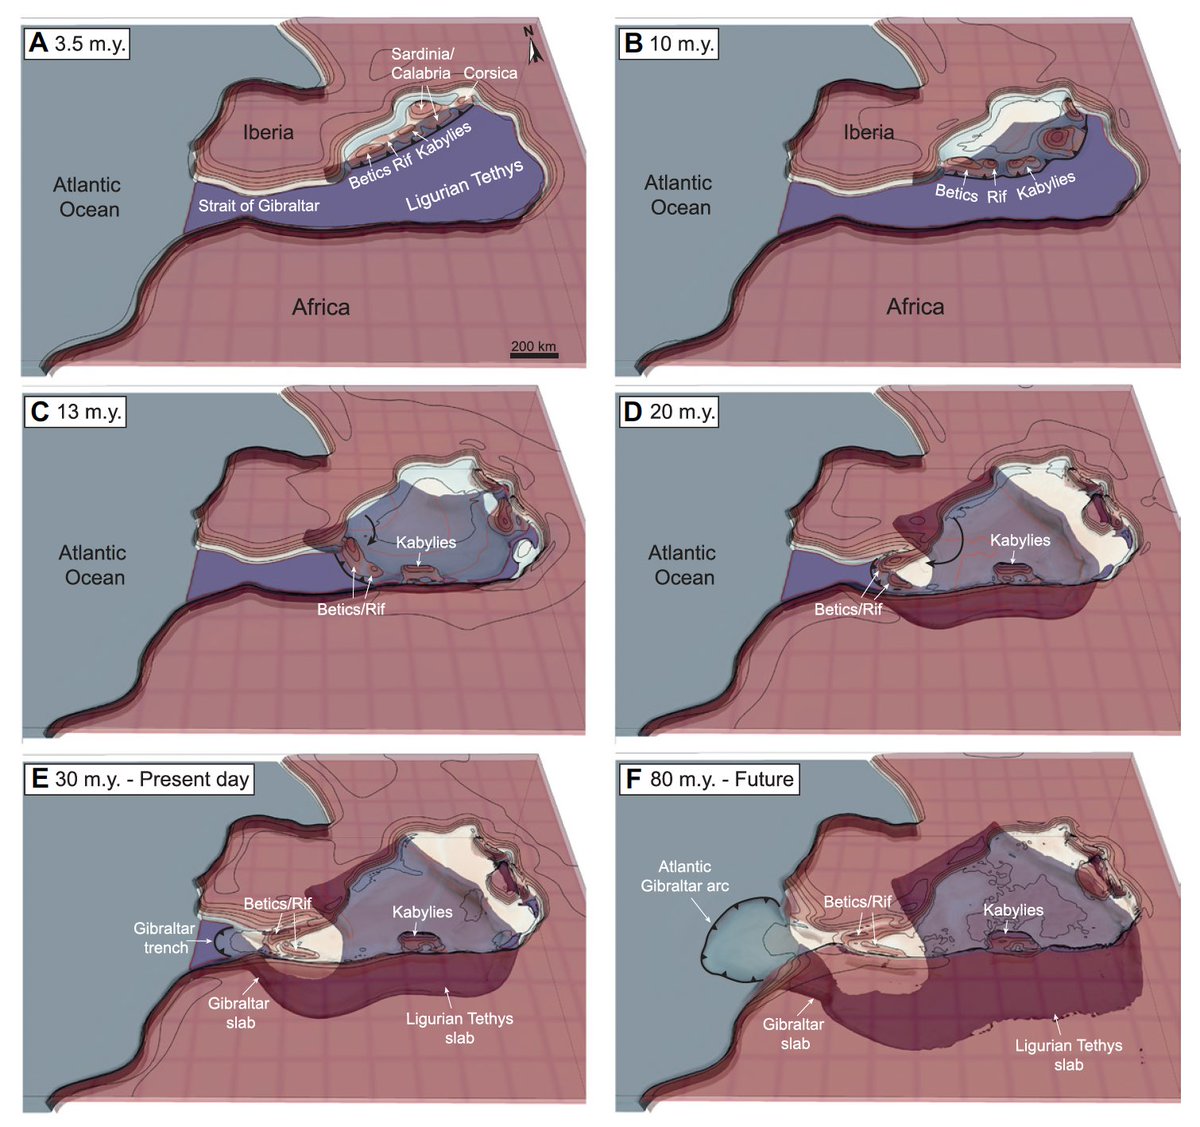 Subduction zones are difficult to start in Atlantic-type oceans. Our paper explores the alternative mechanisms of invasion, in which a subduction zone migrates from a dying ocean to a new growing ocean. Here's the main figure of the paper. doi.org/10.1130/G51654… #geology